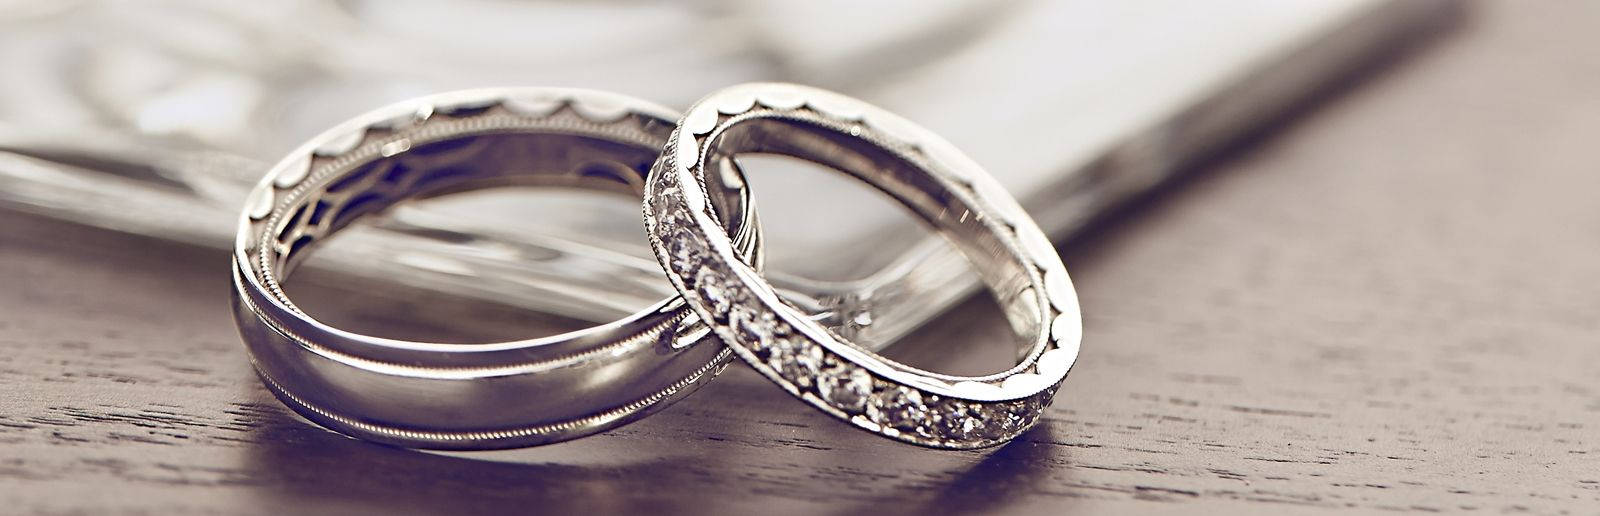 Silver With Diamond Wedding Rings Background